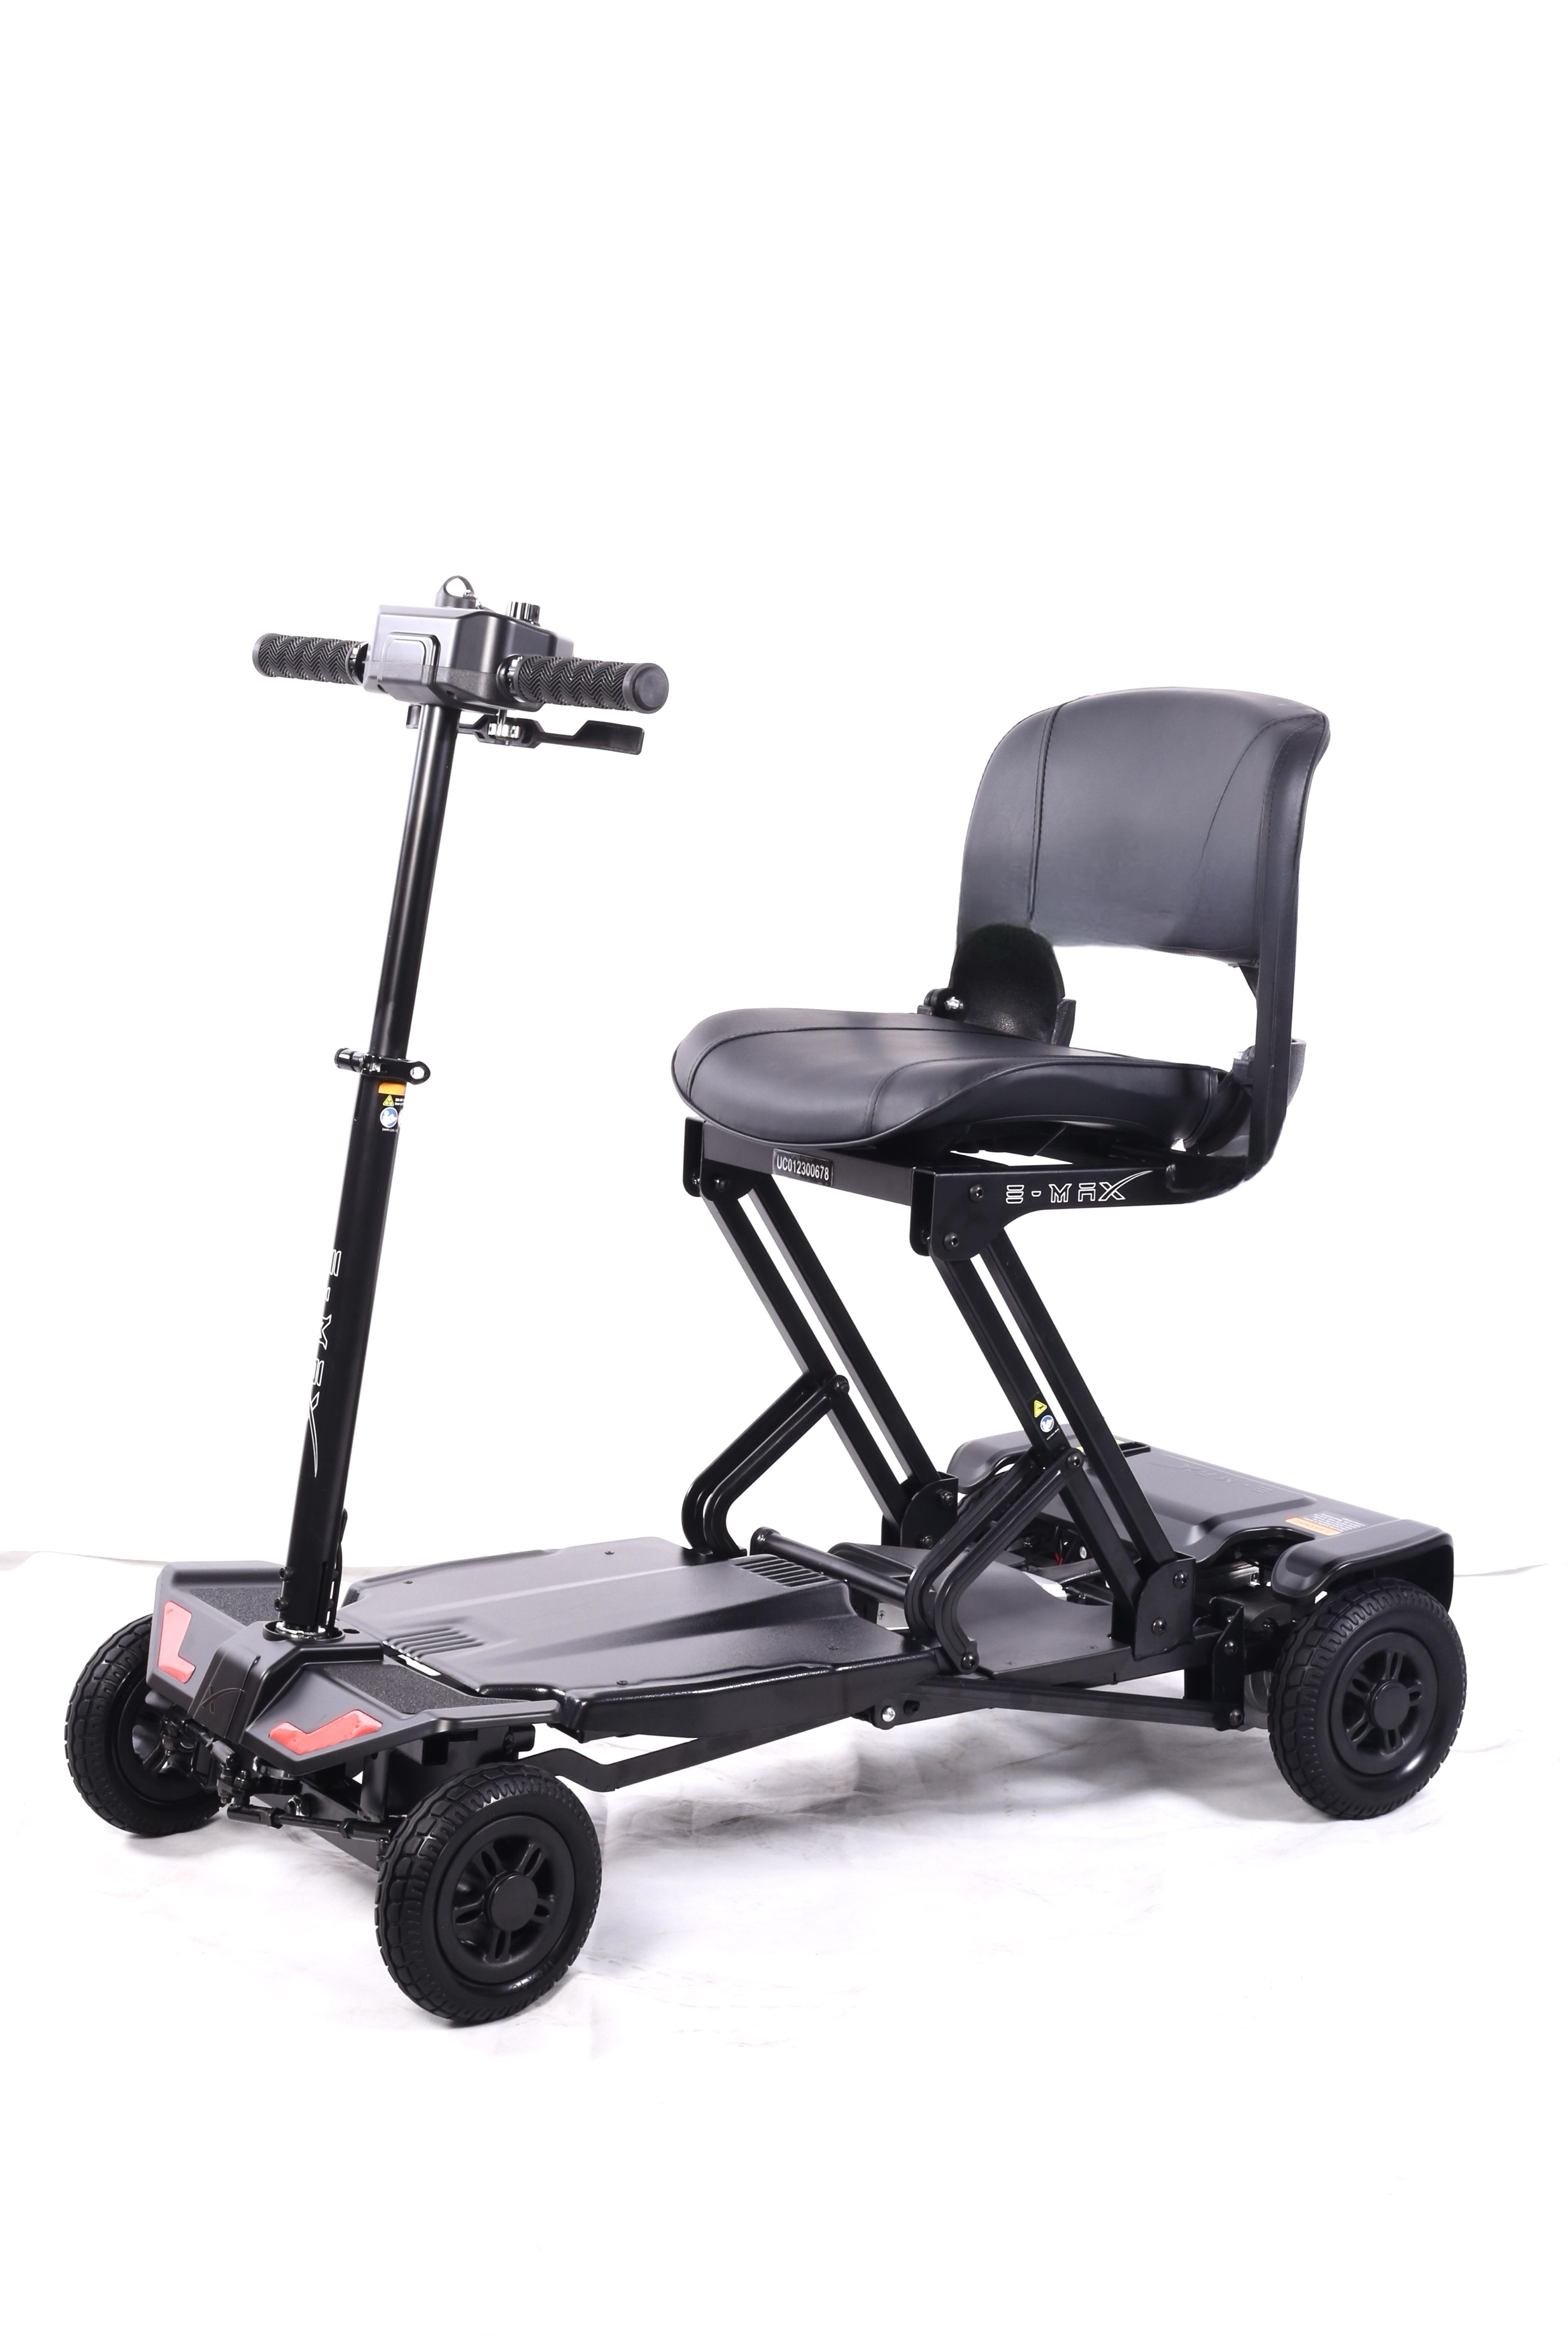 EMax Folding Mobility Scooter